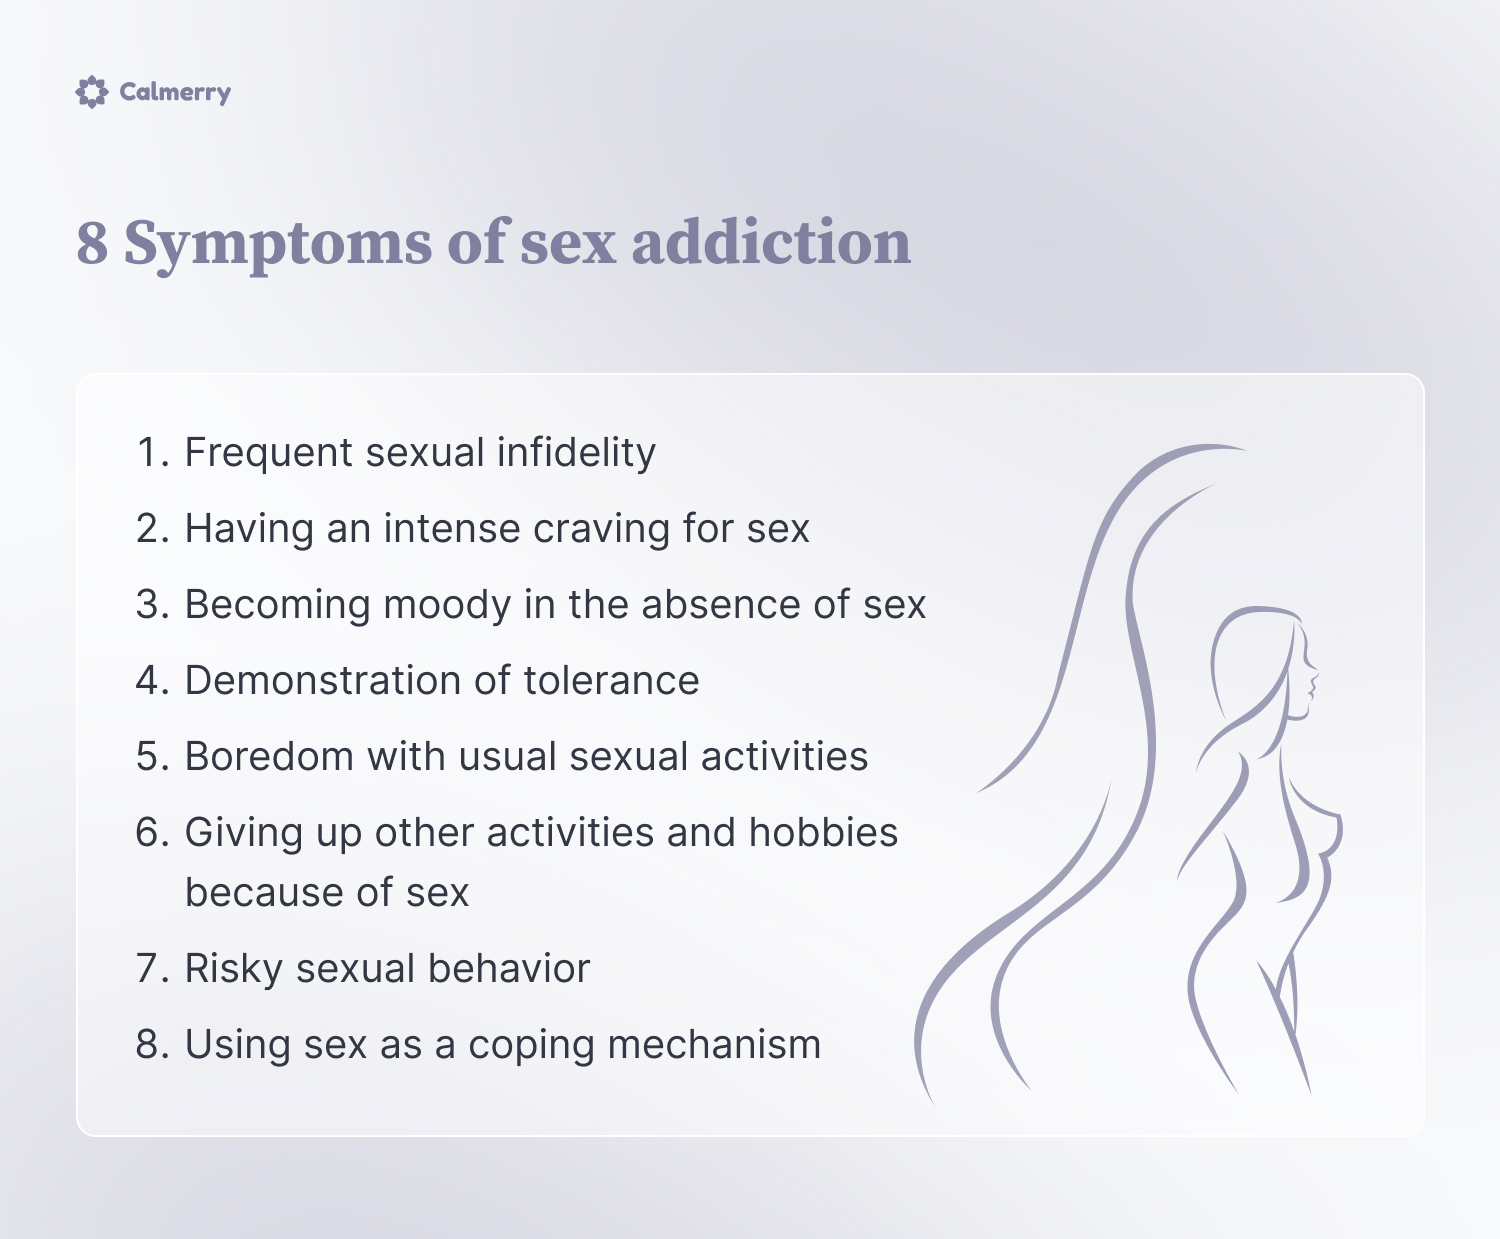 8 Symptoms of sex addiction
Frequent sexual infidelity 
Having an intense craving for sex
Becoming moody in the absence of sex
Demonstration of tolerance
Boredom with usual sexual activities 
Giving up other activities and hobbies  because of sex
Risky sexual behavior 
Using sex as a coping mechanism